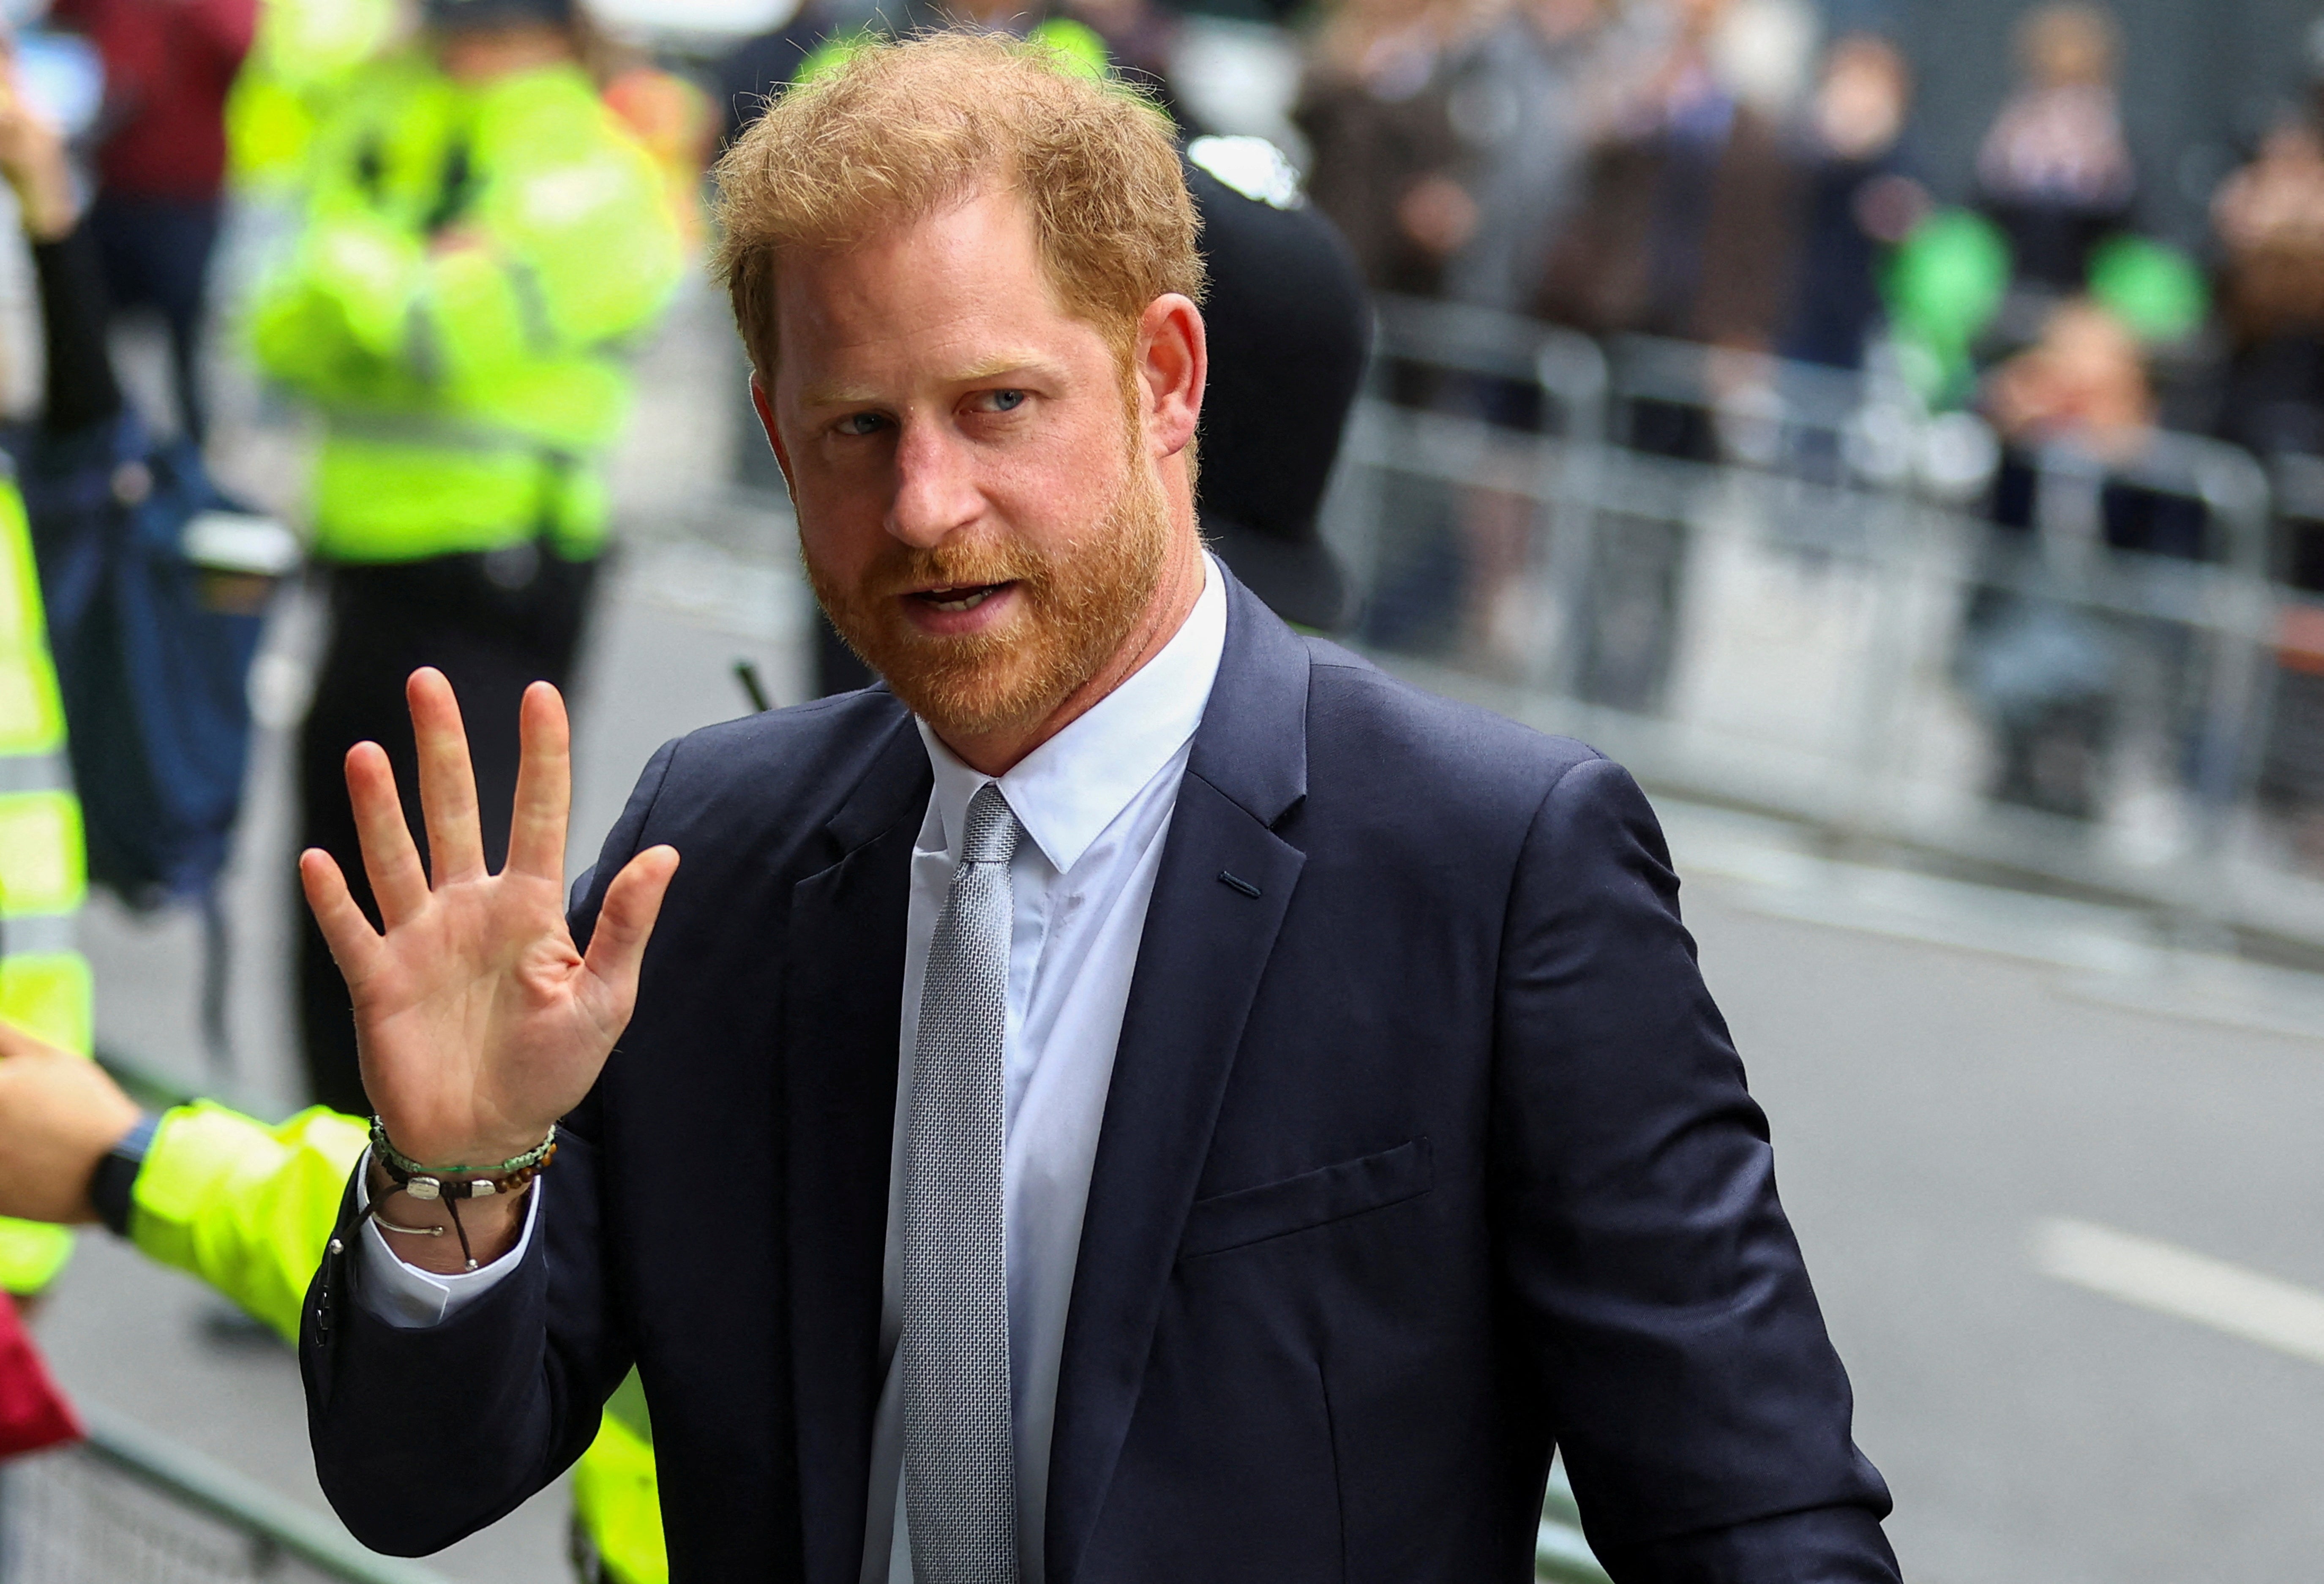 Prince Harry has also taken legal action against NGN